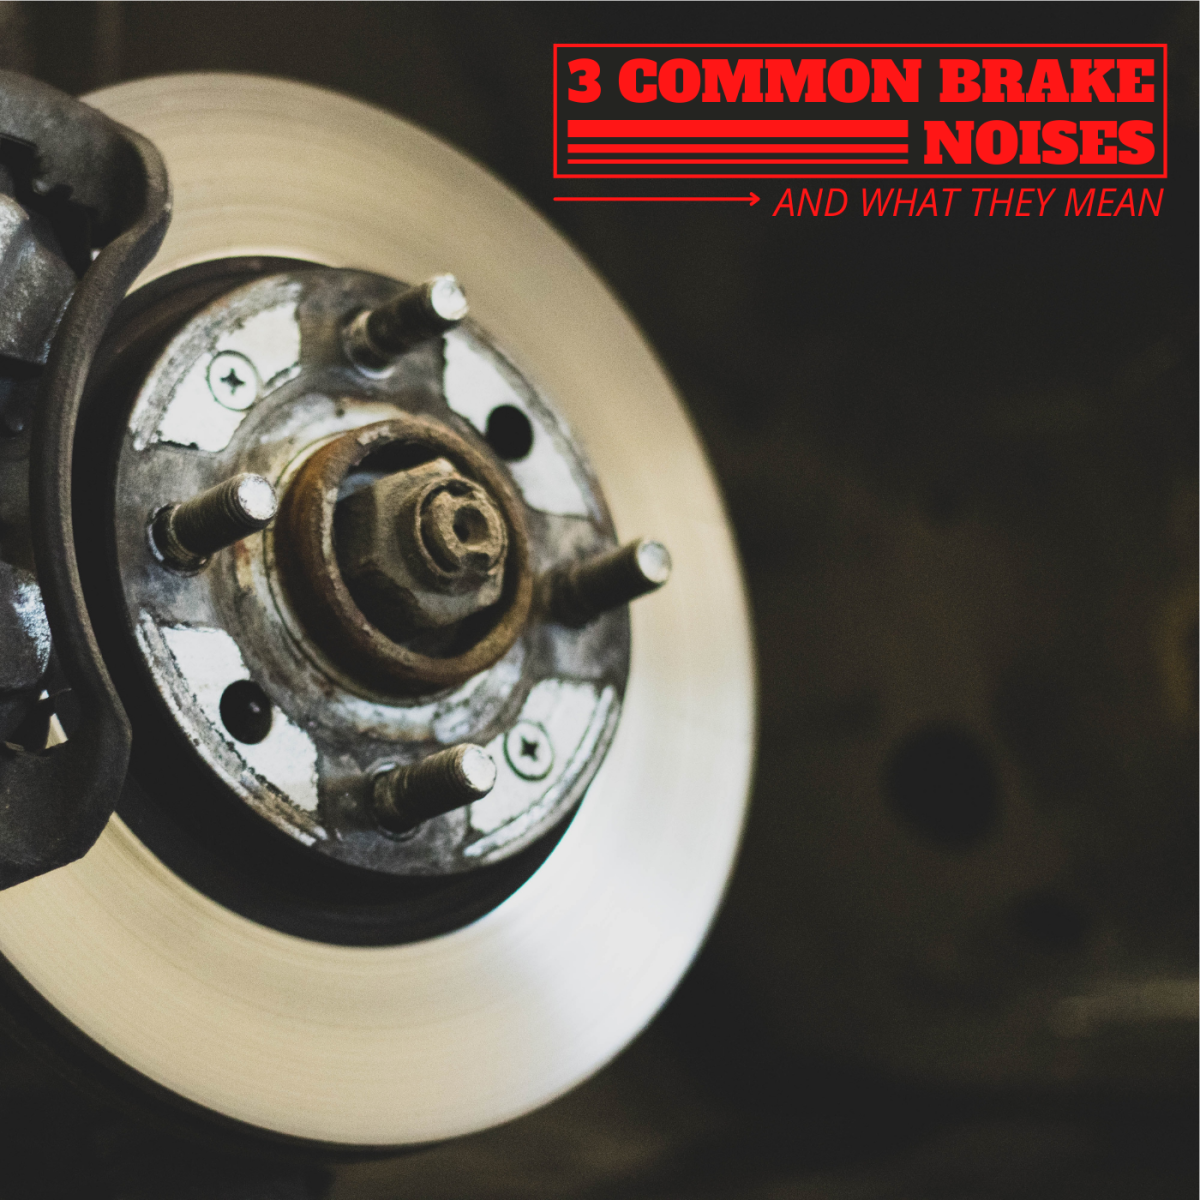 brake noises what causes brake noises and how to fix them